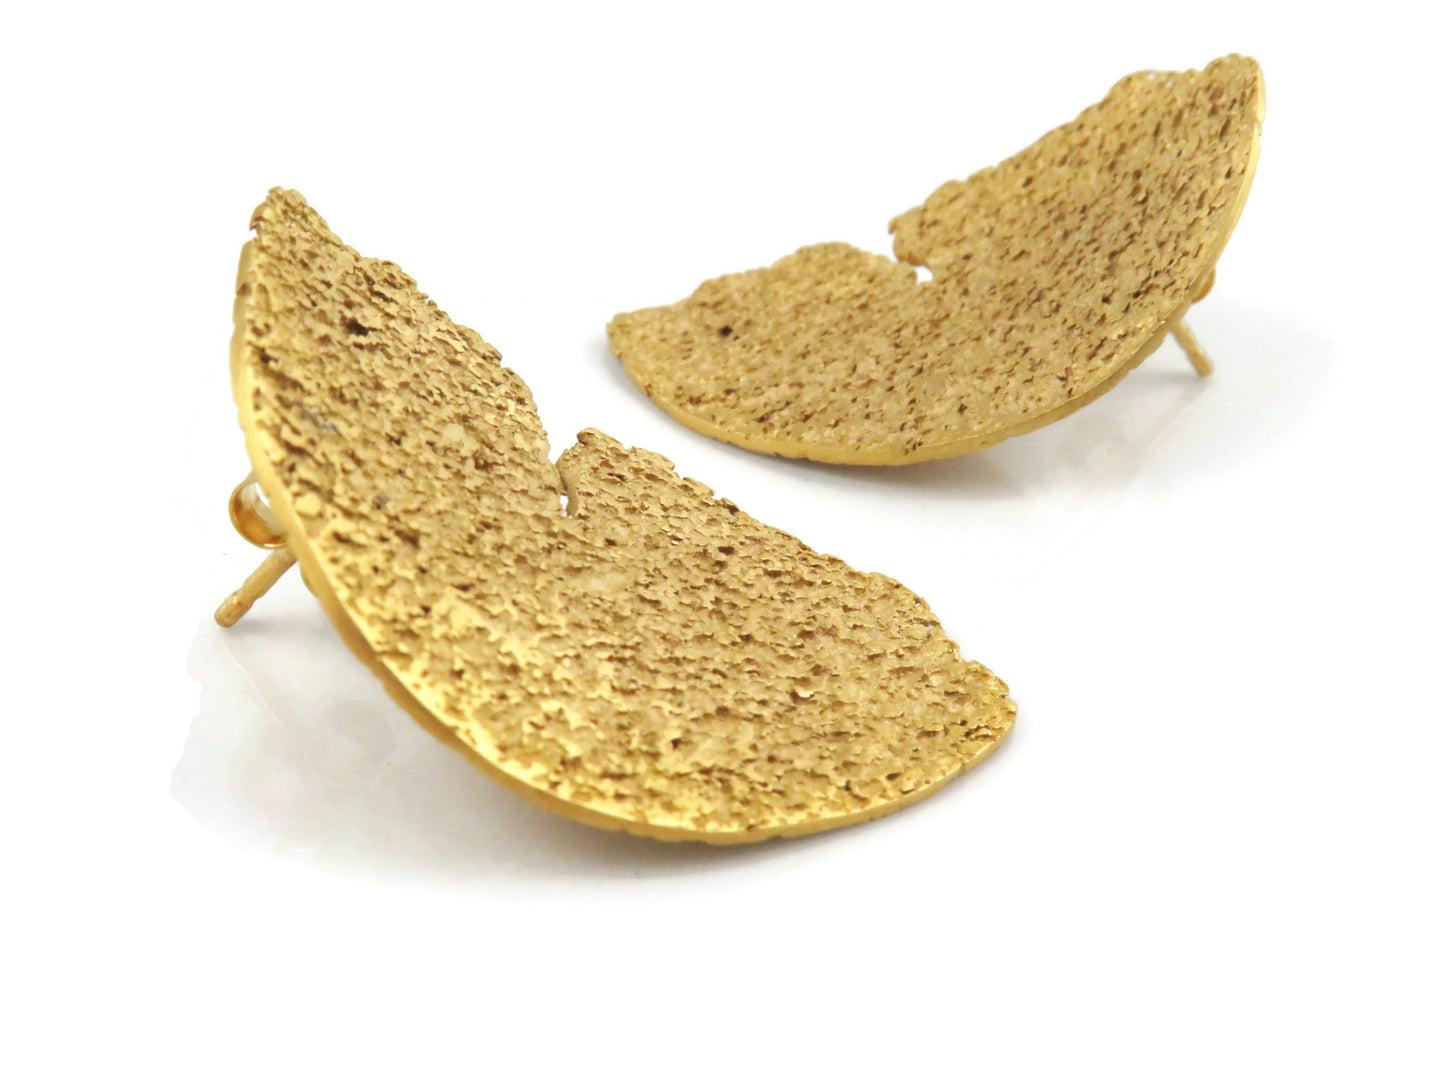 Gold Plated Silver Earrings with Rustic Texture